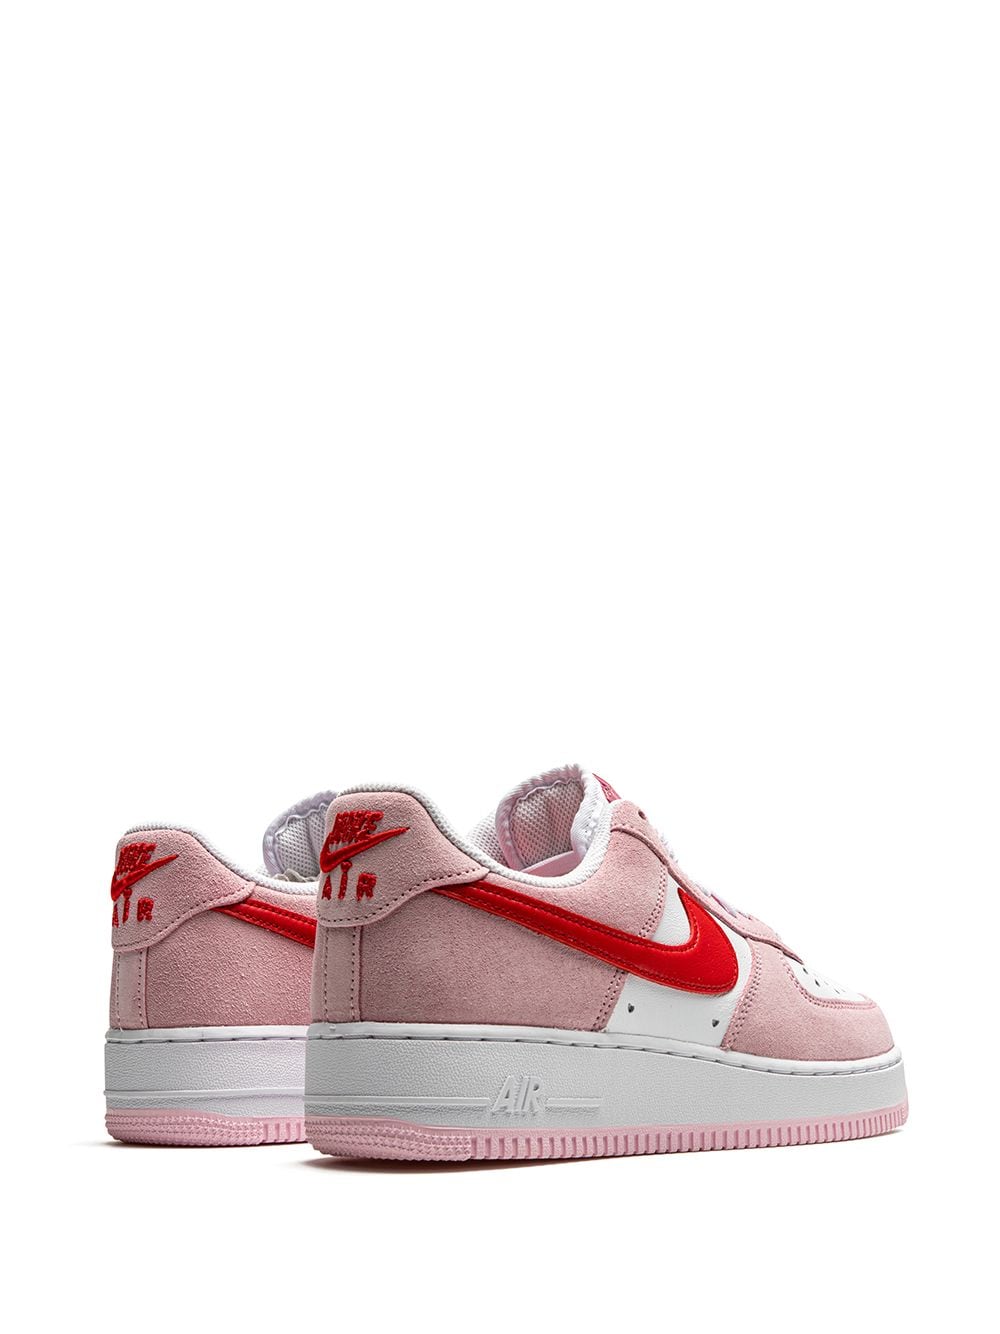 AIR FORCE 1 VALENTINE'S DAY LOVE LETTER 板鞋